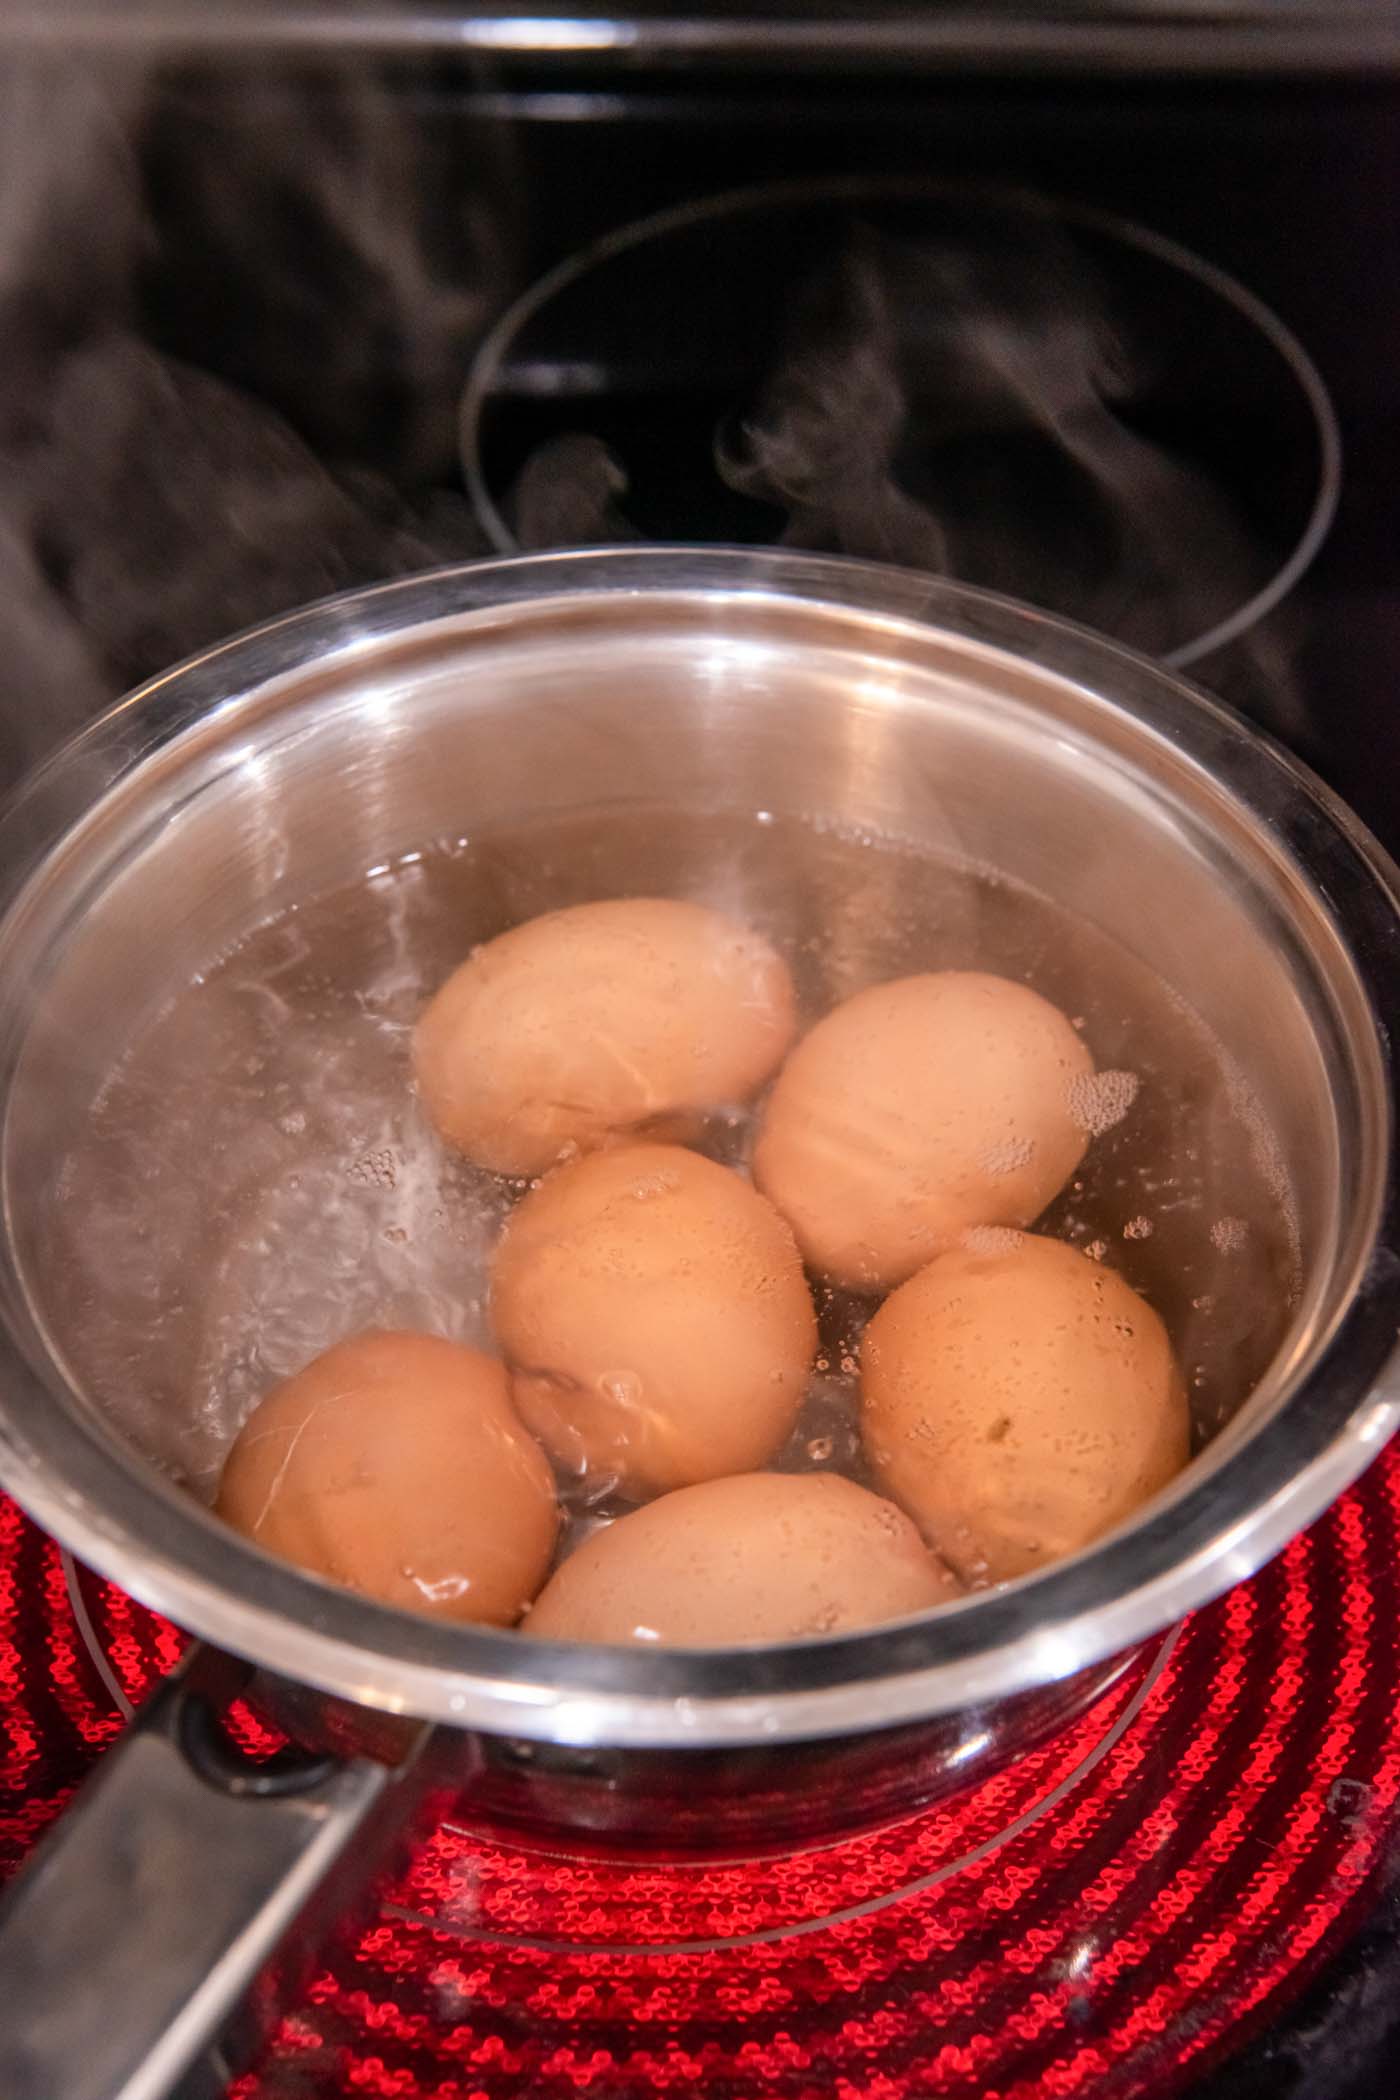 Eggs boiling in pot of water on the stove.